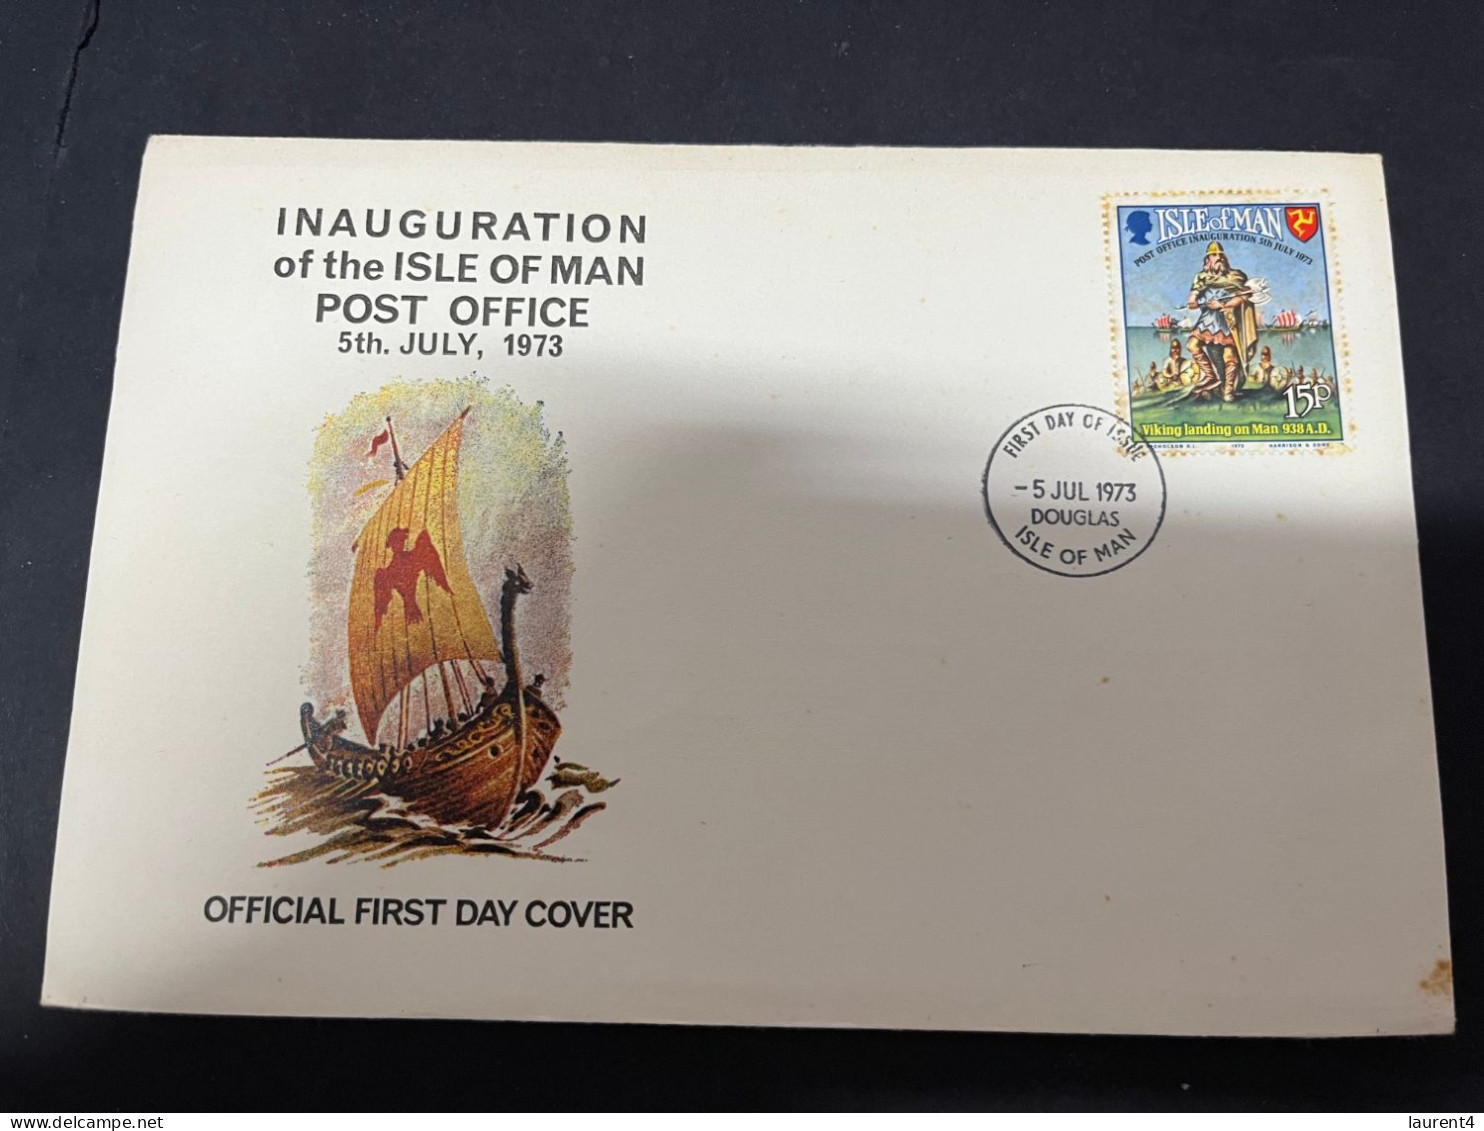 8-5-2024 (4 Z 29)  FDC (Isle Of Man)  - Post Office Inauguaration ( Some Rust ) (19 X 11,5 Cm) With Insert - Isle Of Man